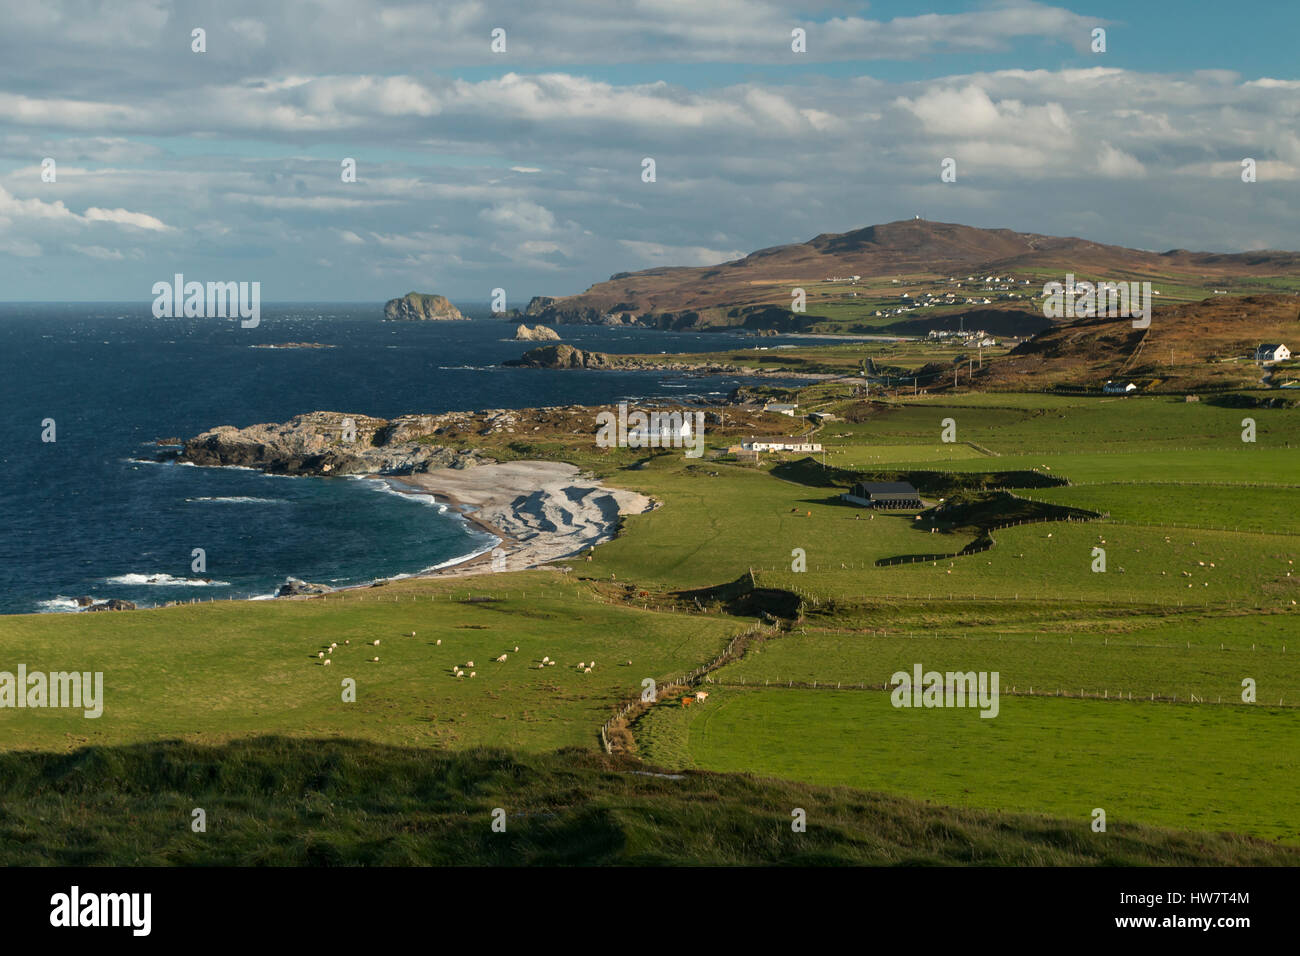 The view from Malin Head, the farthest northerly point in Ireland. Stock Photo